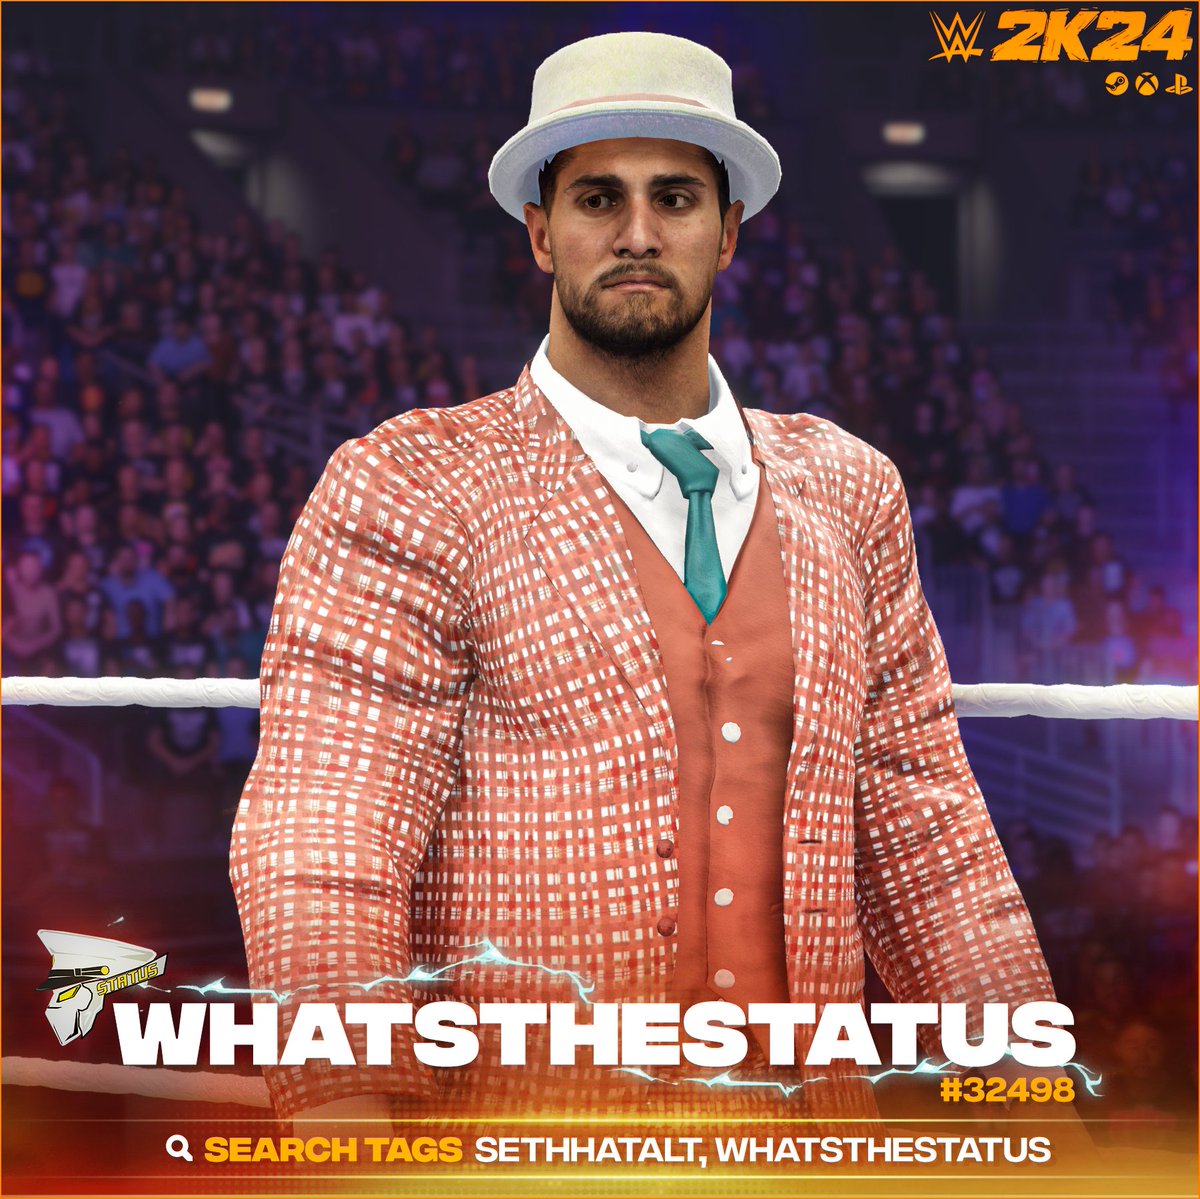 NEW! #WWE2K24 Upload To Community Creations! ★ SETH ROLLINS '24 (SUIT) - Ingame Model Edit ★ Search Tag → SETHHATALT or WhatsTheStatus ★ Support Me → linktr.ee/WhatsTheStatus ★ INCLUDES ● Custom Portrait ● Removed Beard ● Commentary (Seth Rollins) ● Ring Announcer…